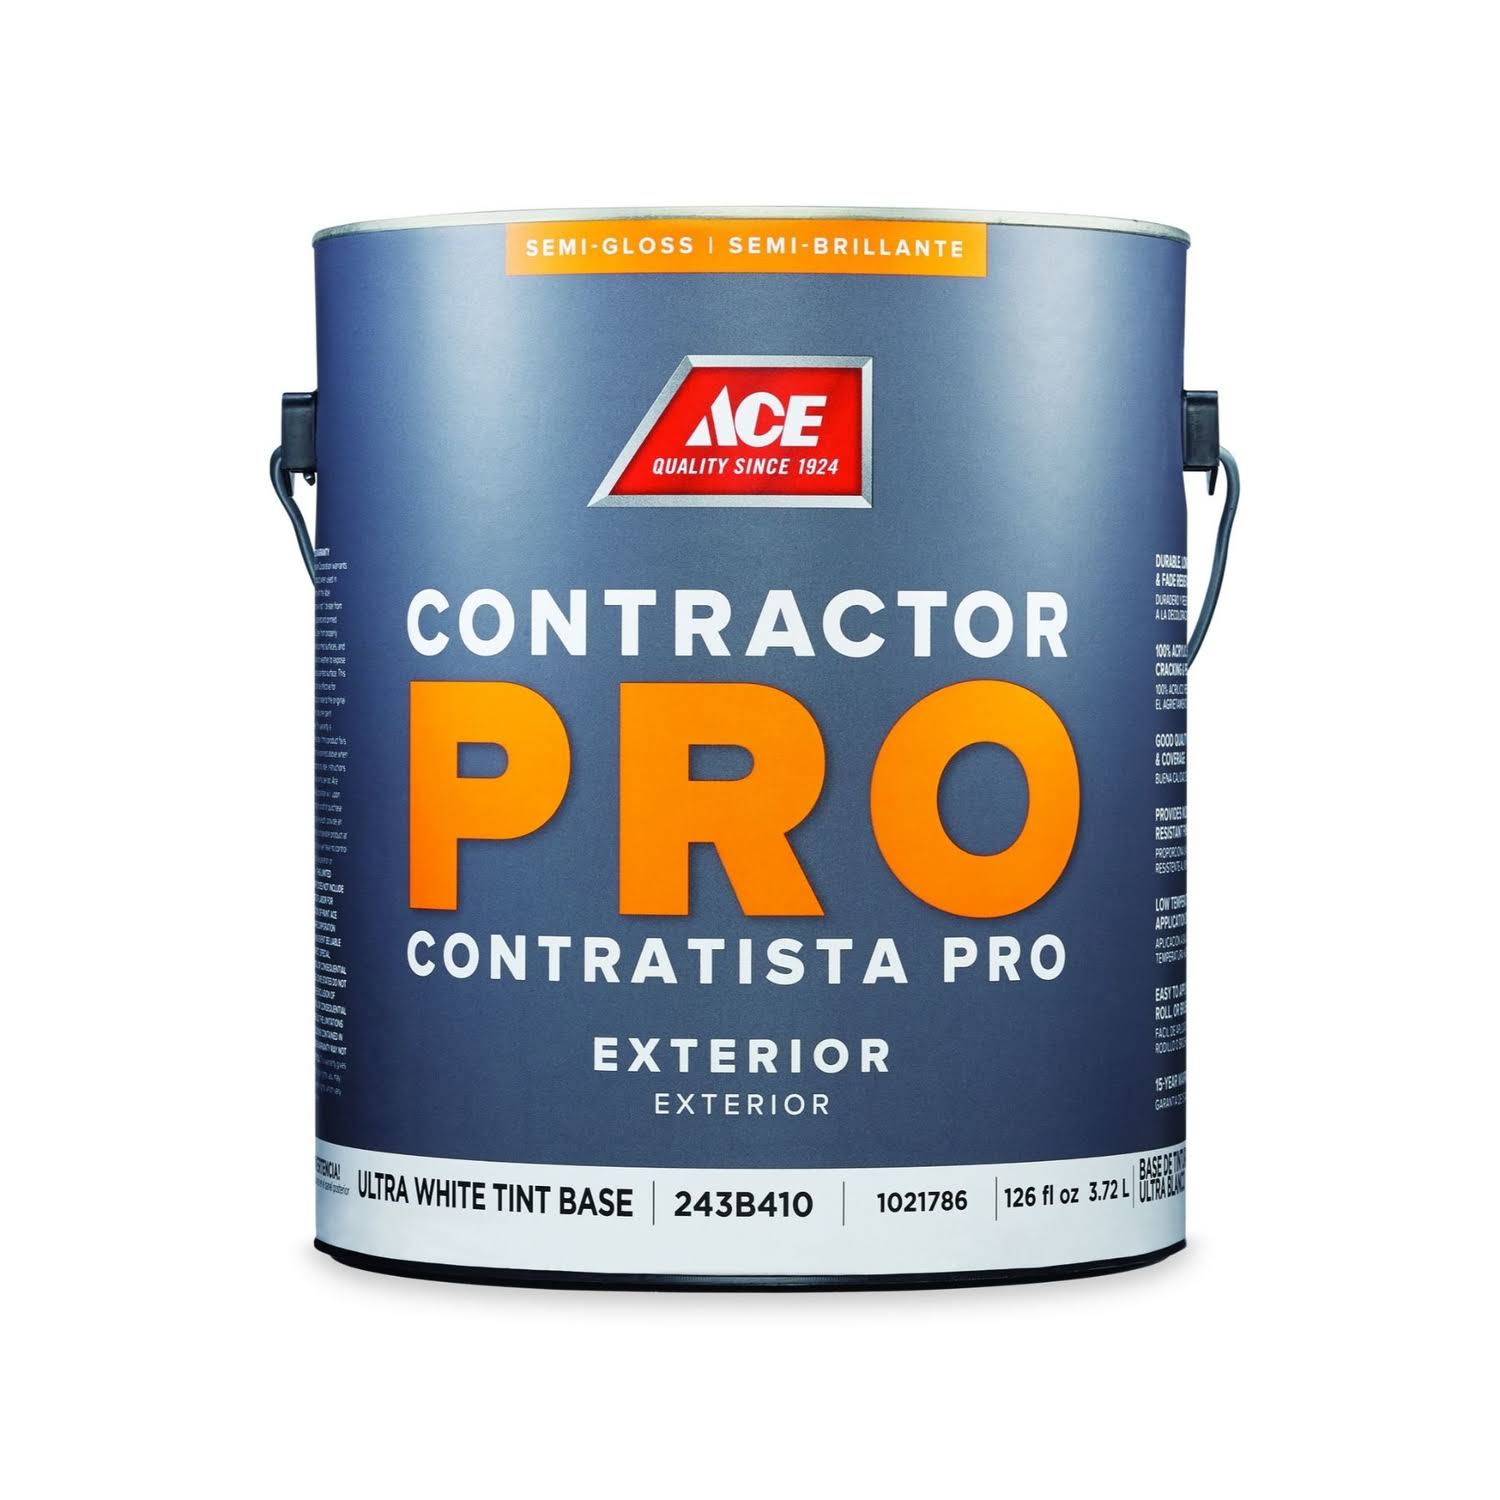 Ace Contractor Pro Semi-Gloss Tint Base Ultra White Base Acrylic Latex Paint Exterior 1 gal.